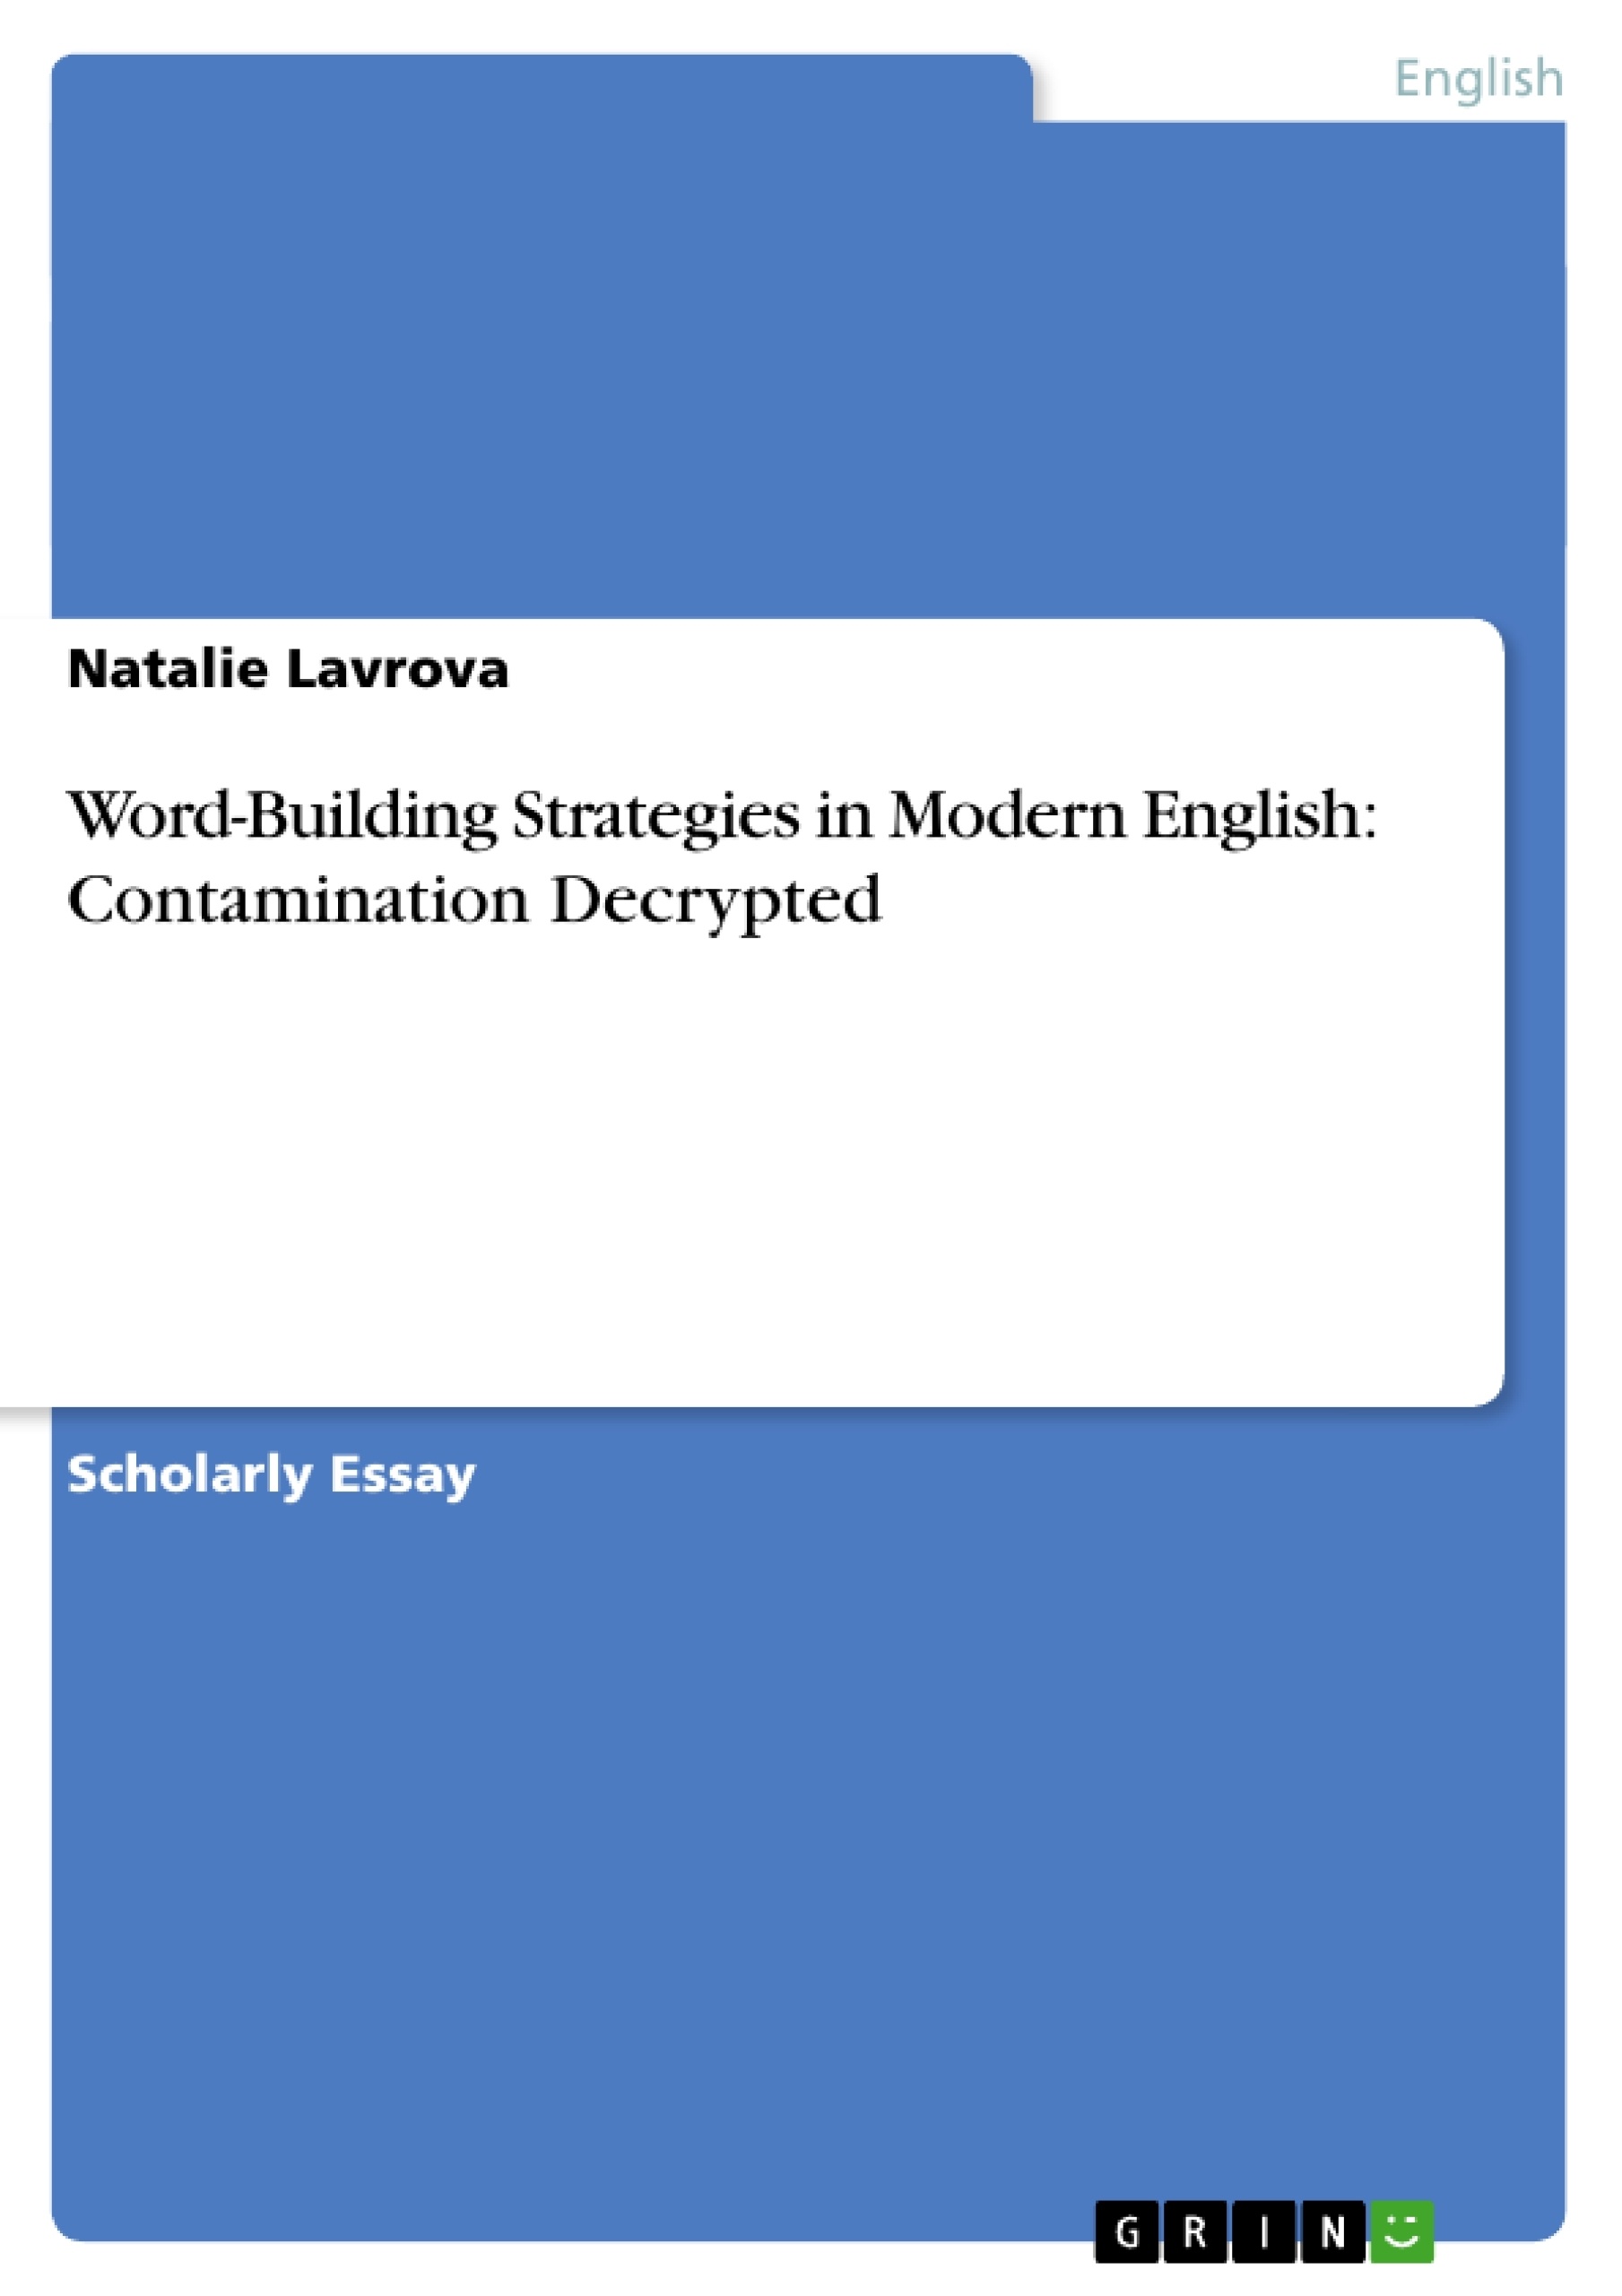 Title: Word-Building Strategies in Modern English: Contamination Decrypted 